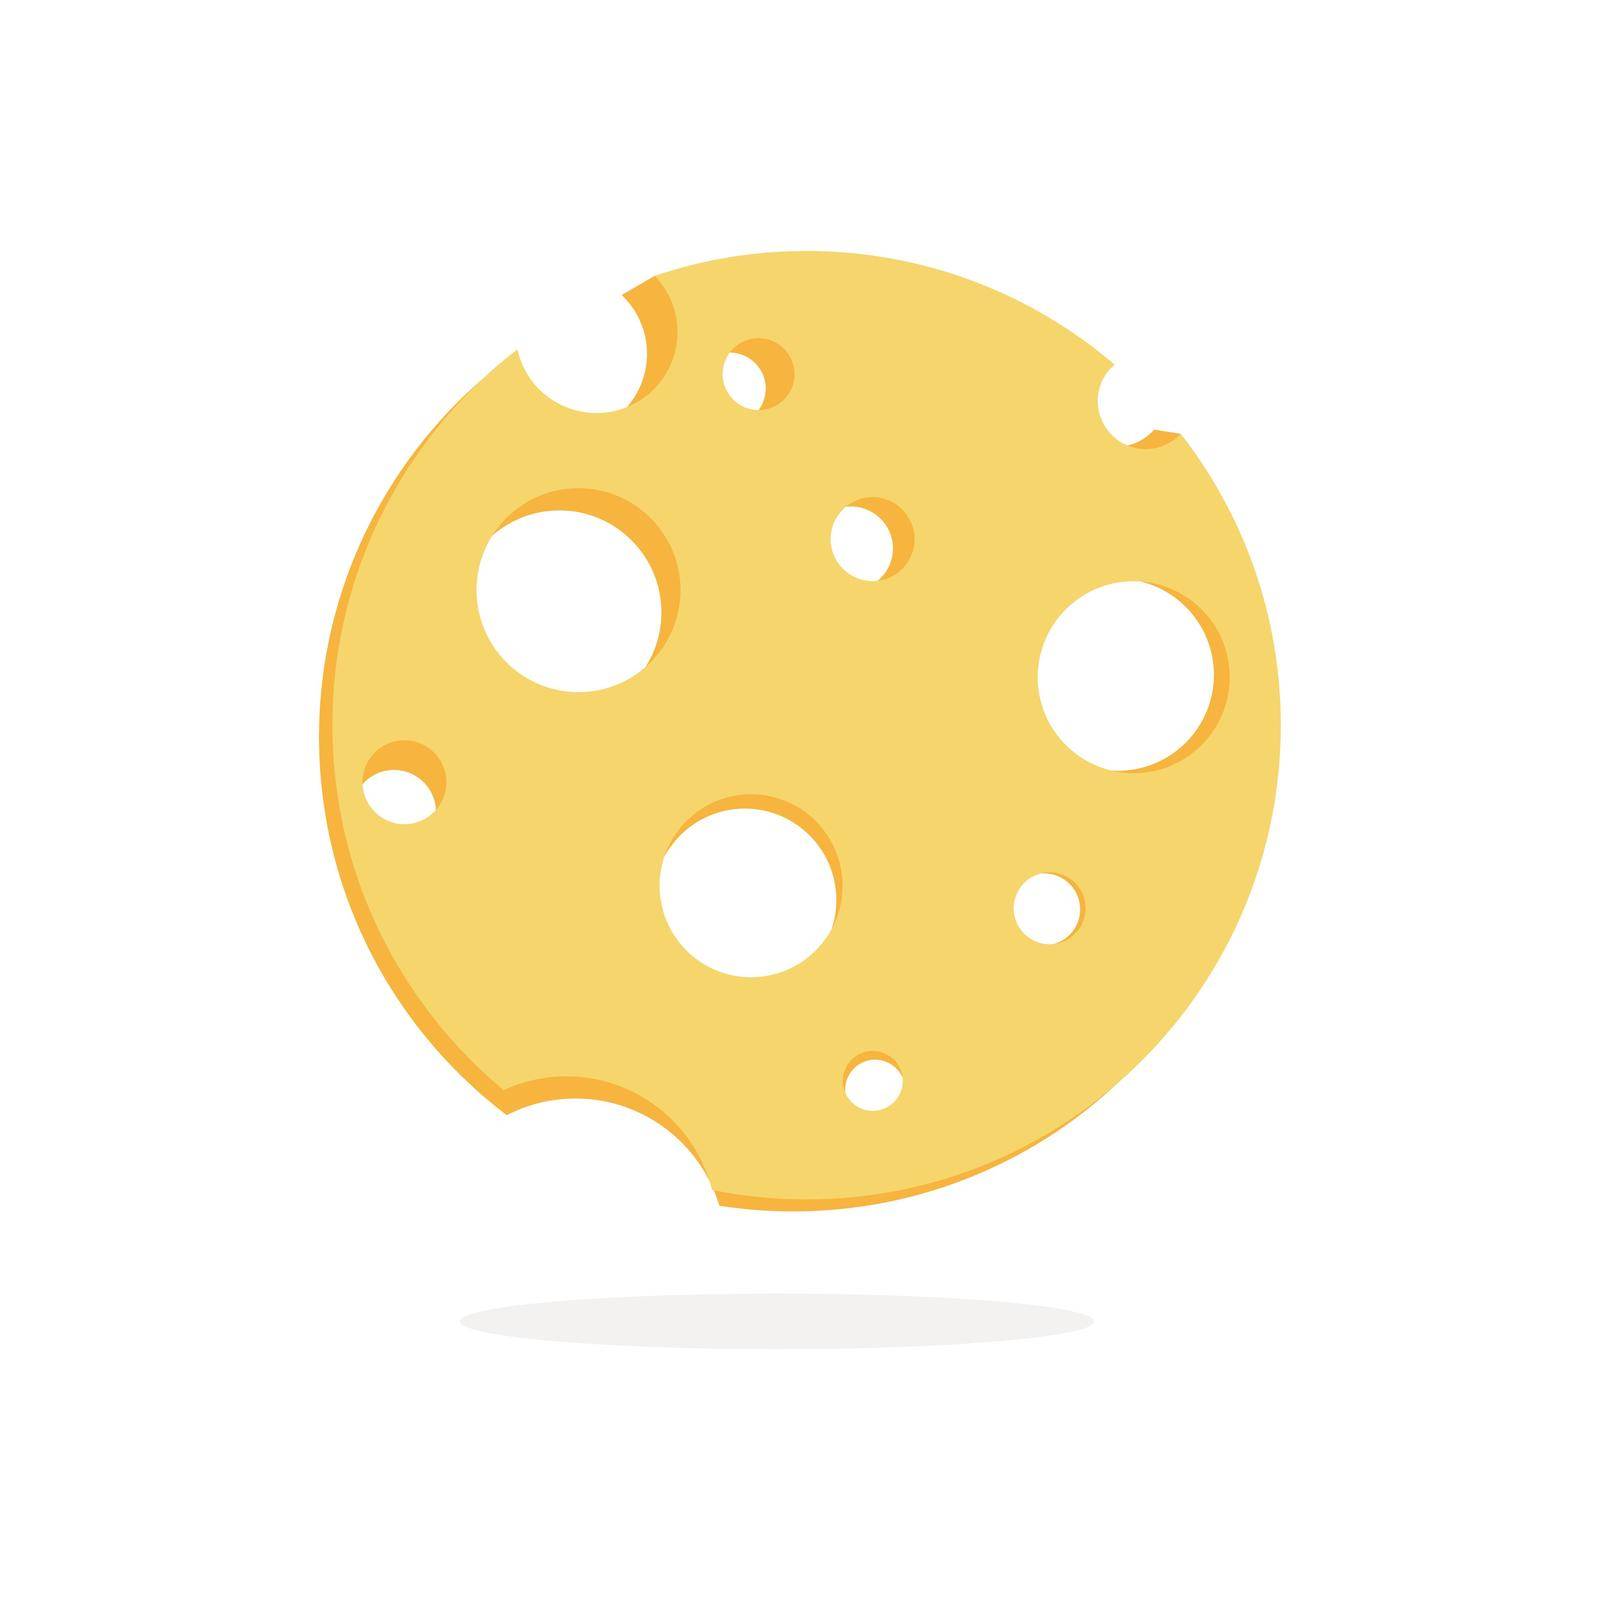 Cheese icons round form isolated on white background